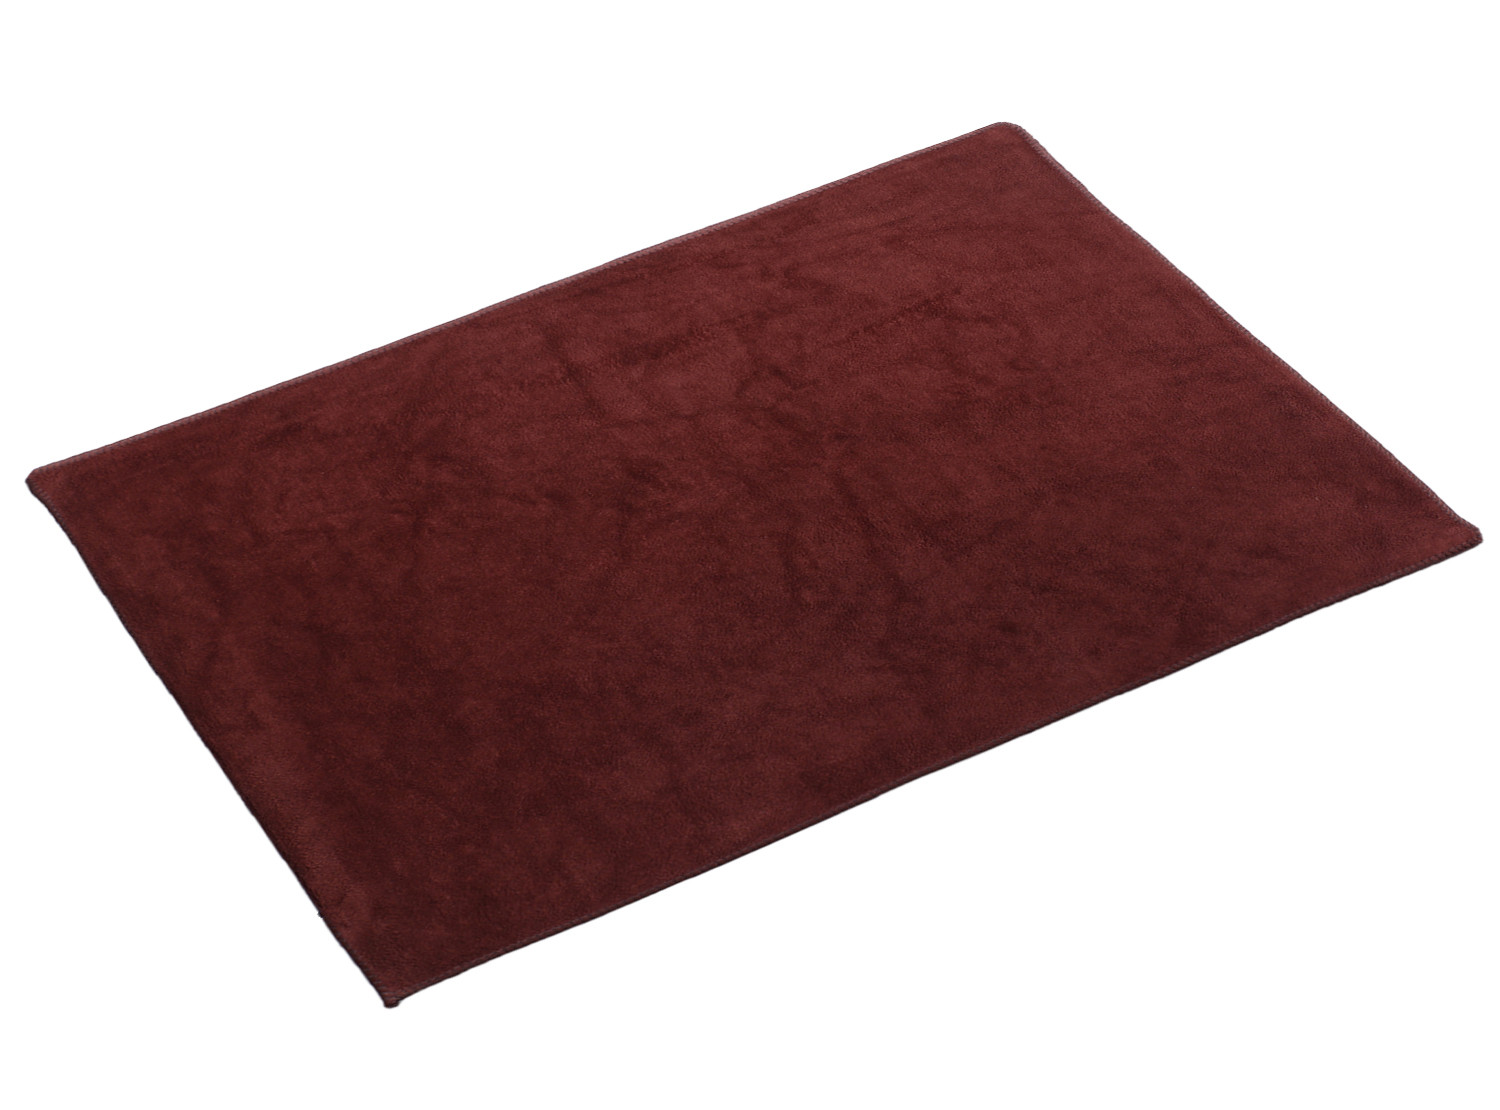 Kuber Industries Cleaning Cloths|Microfiber Highly Absorbent Wash Towels for Kitchen,Car,Window,24 x 16 Inch (Brown)